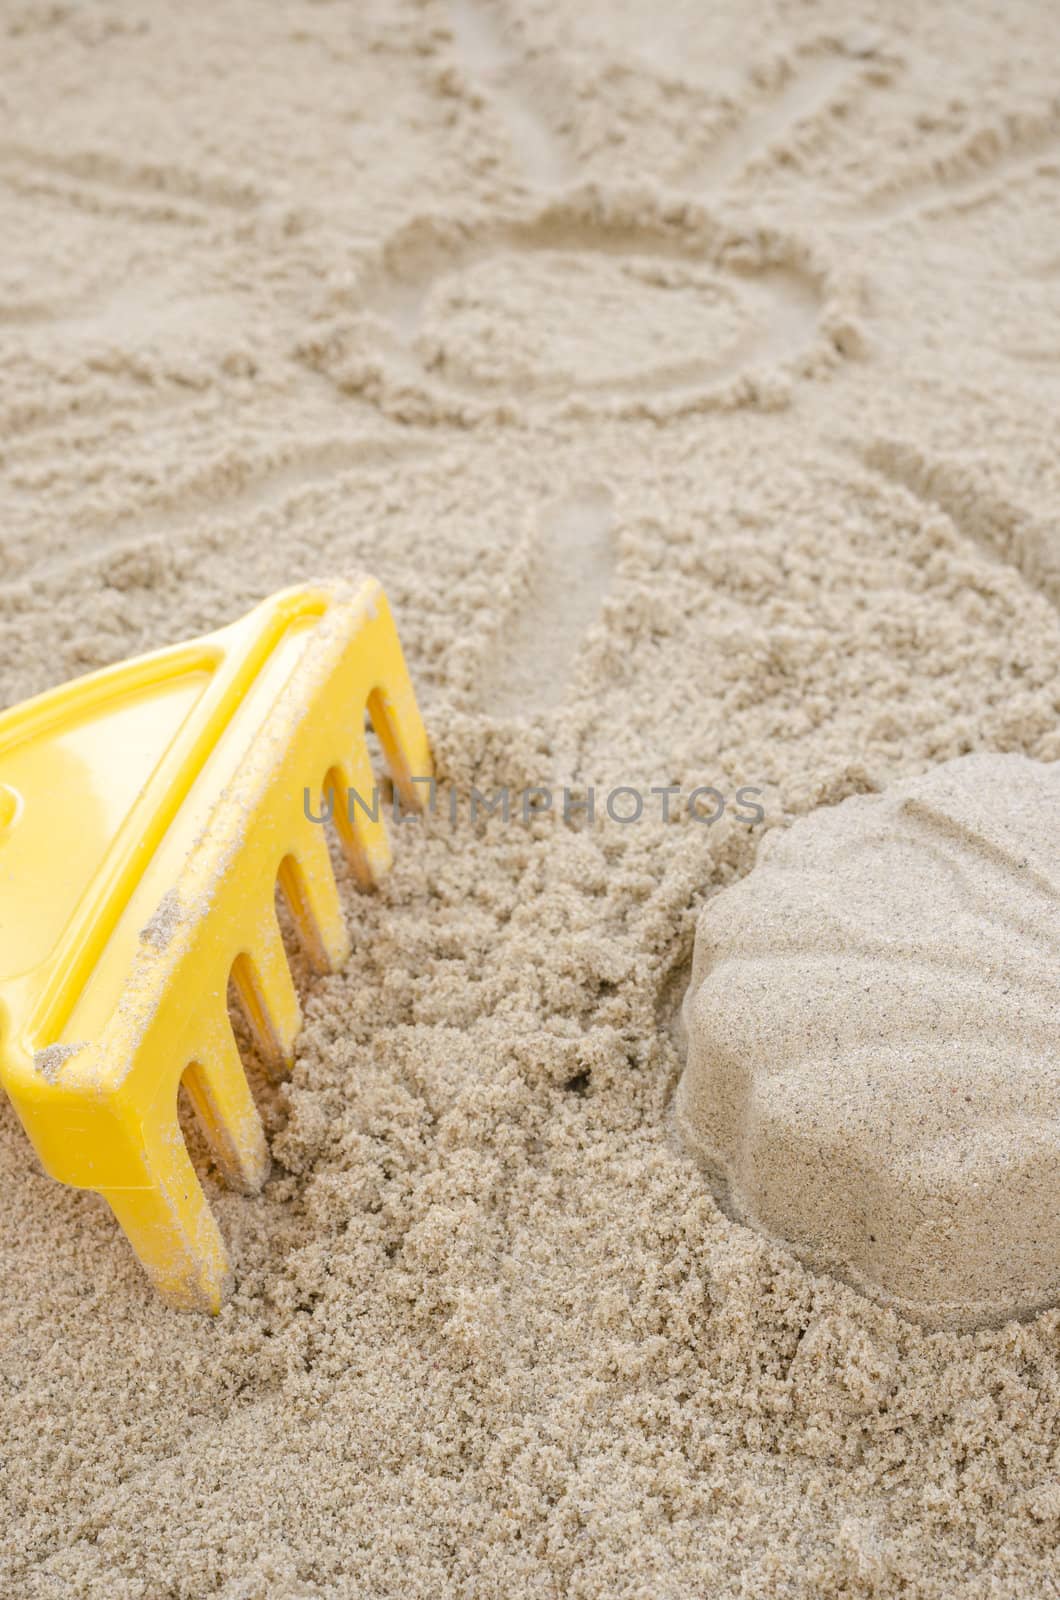 Closeup of sun drawn in sand with shell made of sand and toy rakes next to it.